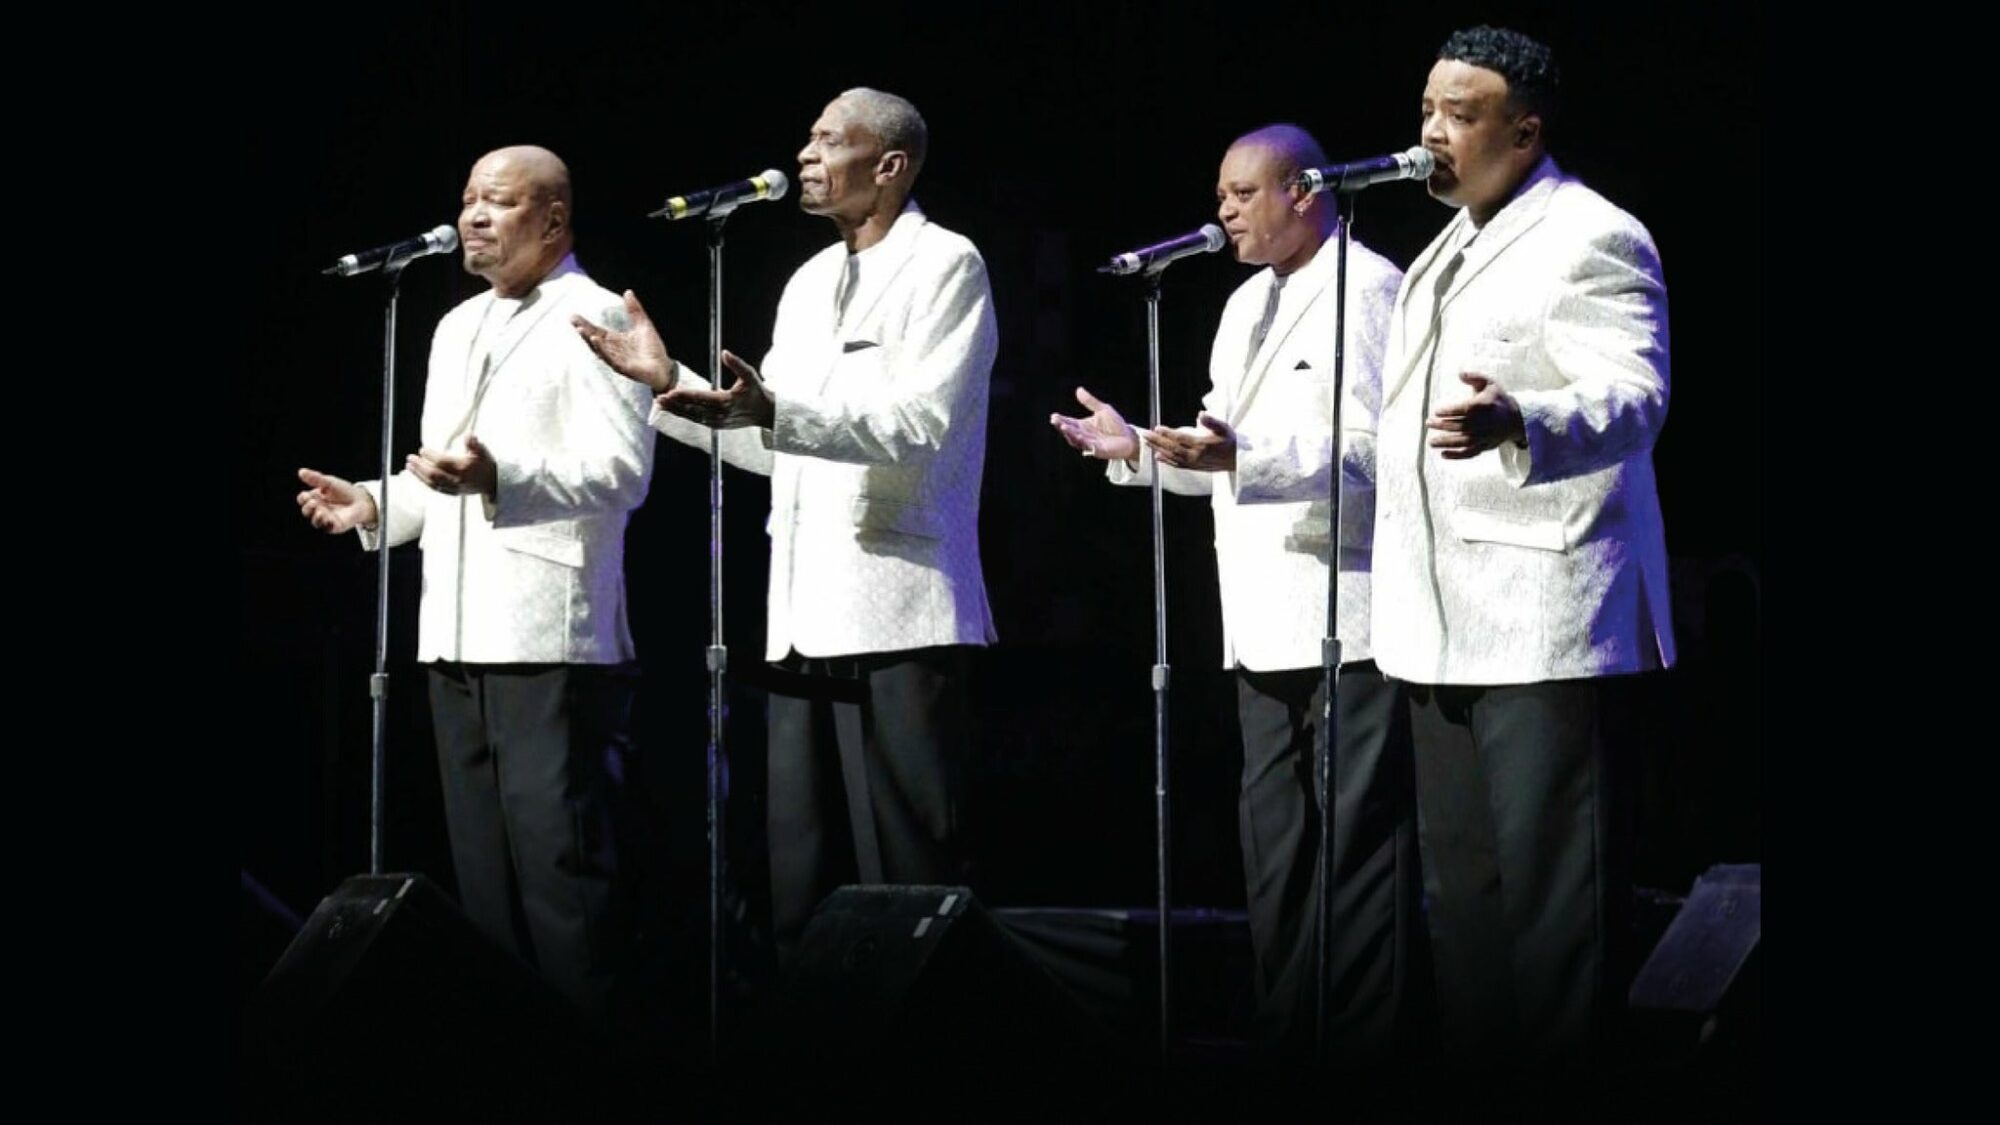 Image name The Stylistics at Sheffield City Hall Oval Hall Sheffield the 4 image from the post Events in Yorkshire.com.